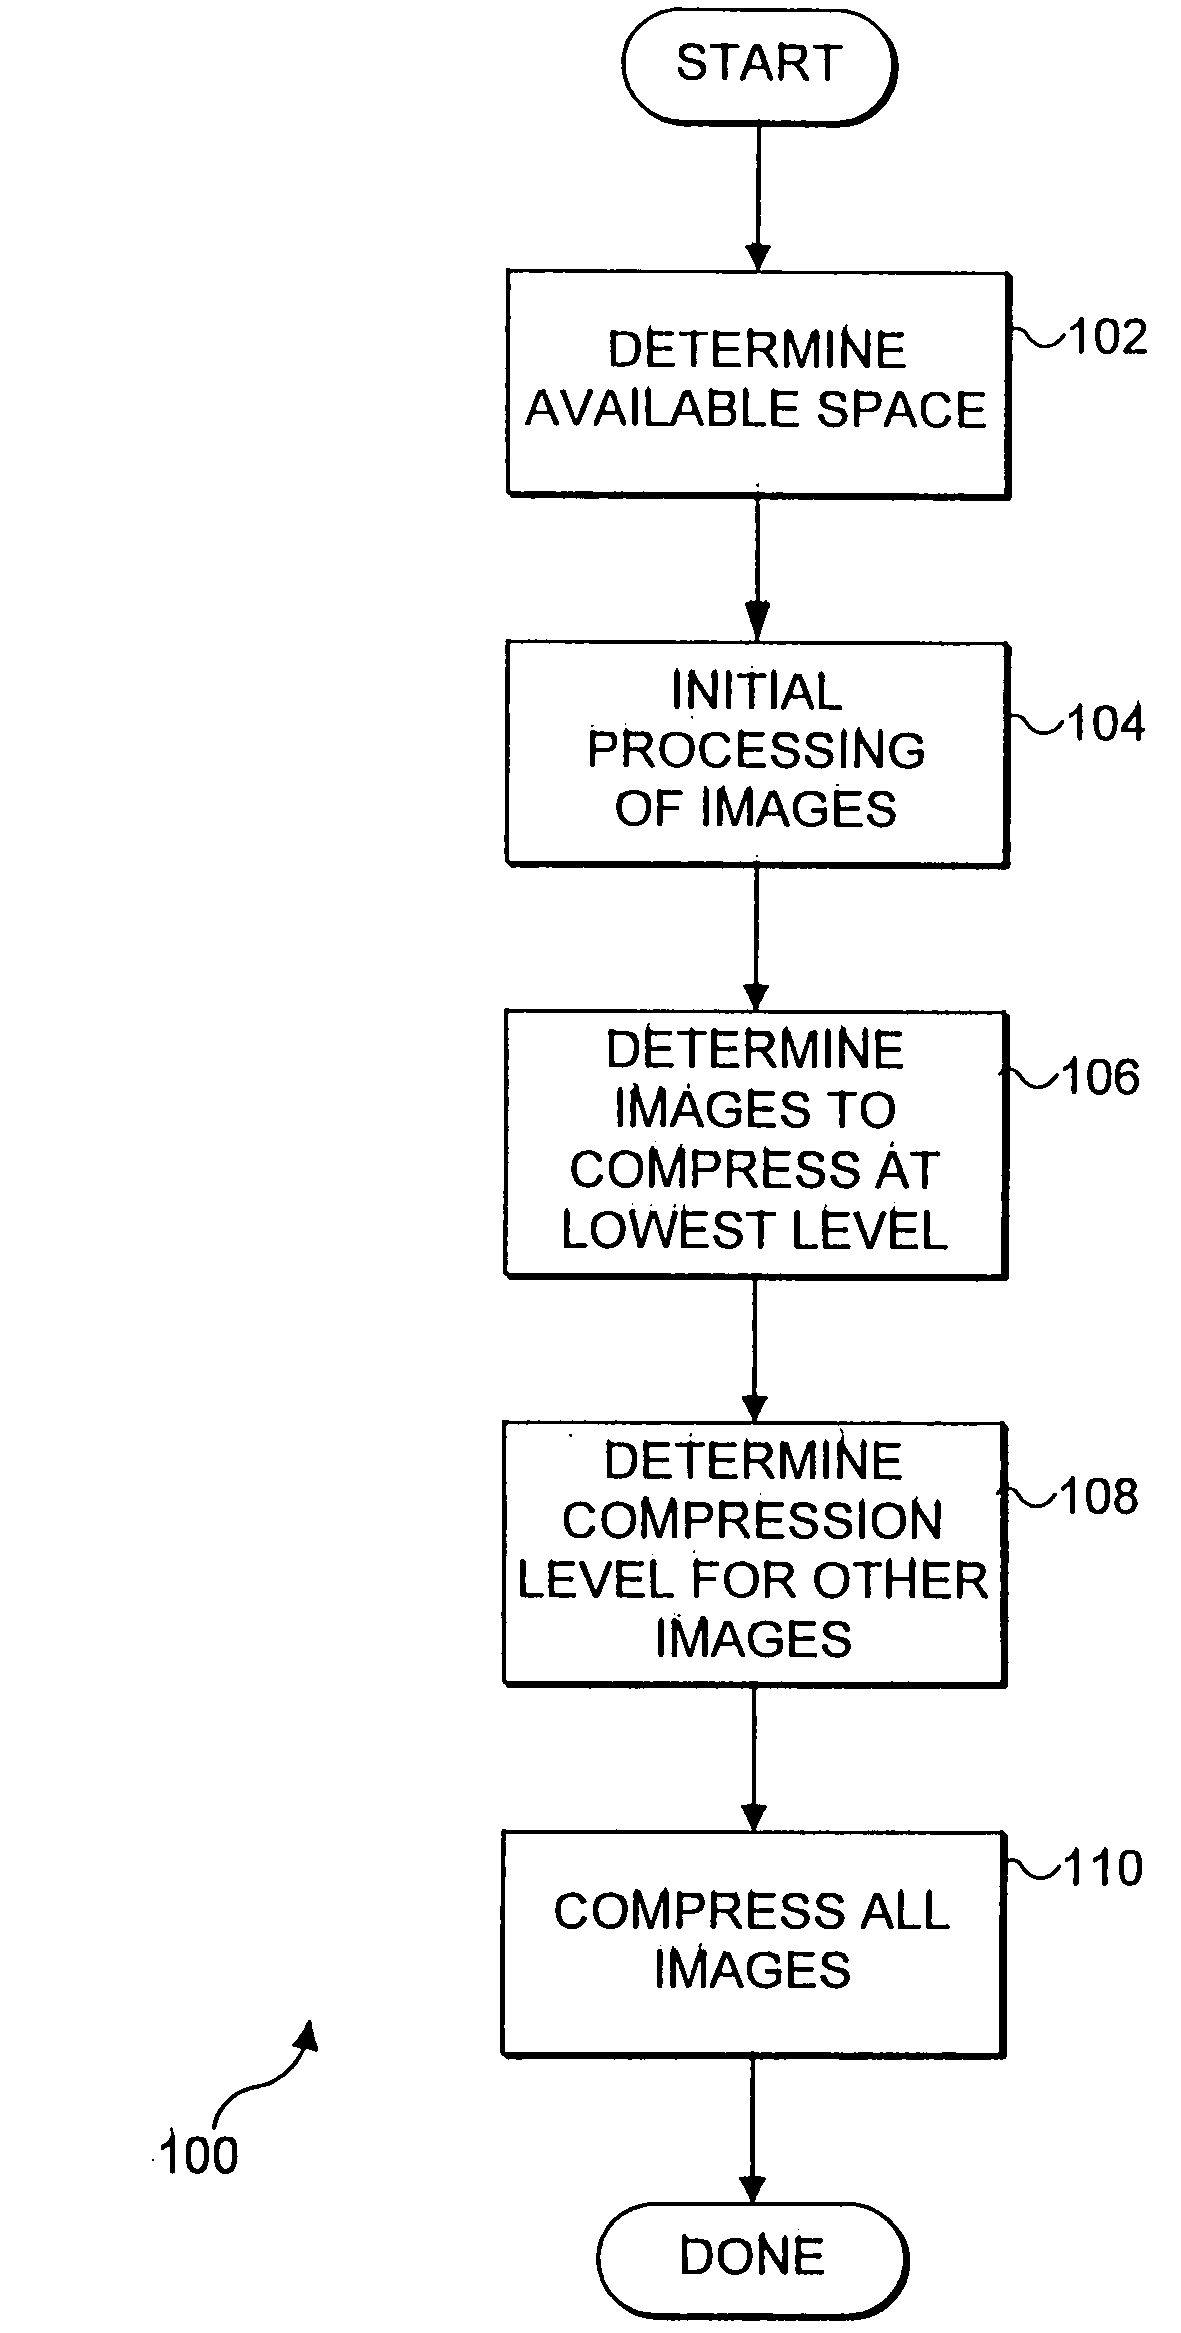 Distributing limited storage among a collection of media objects